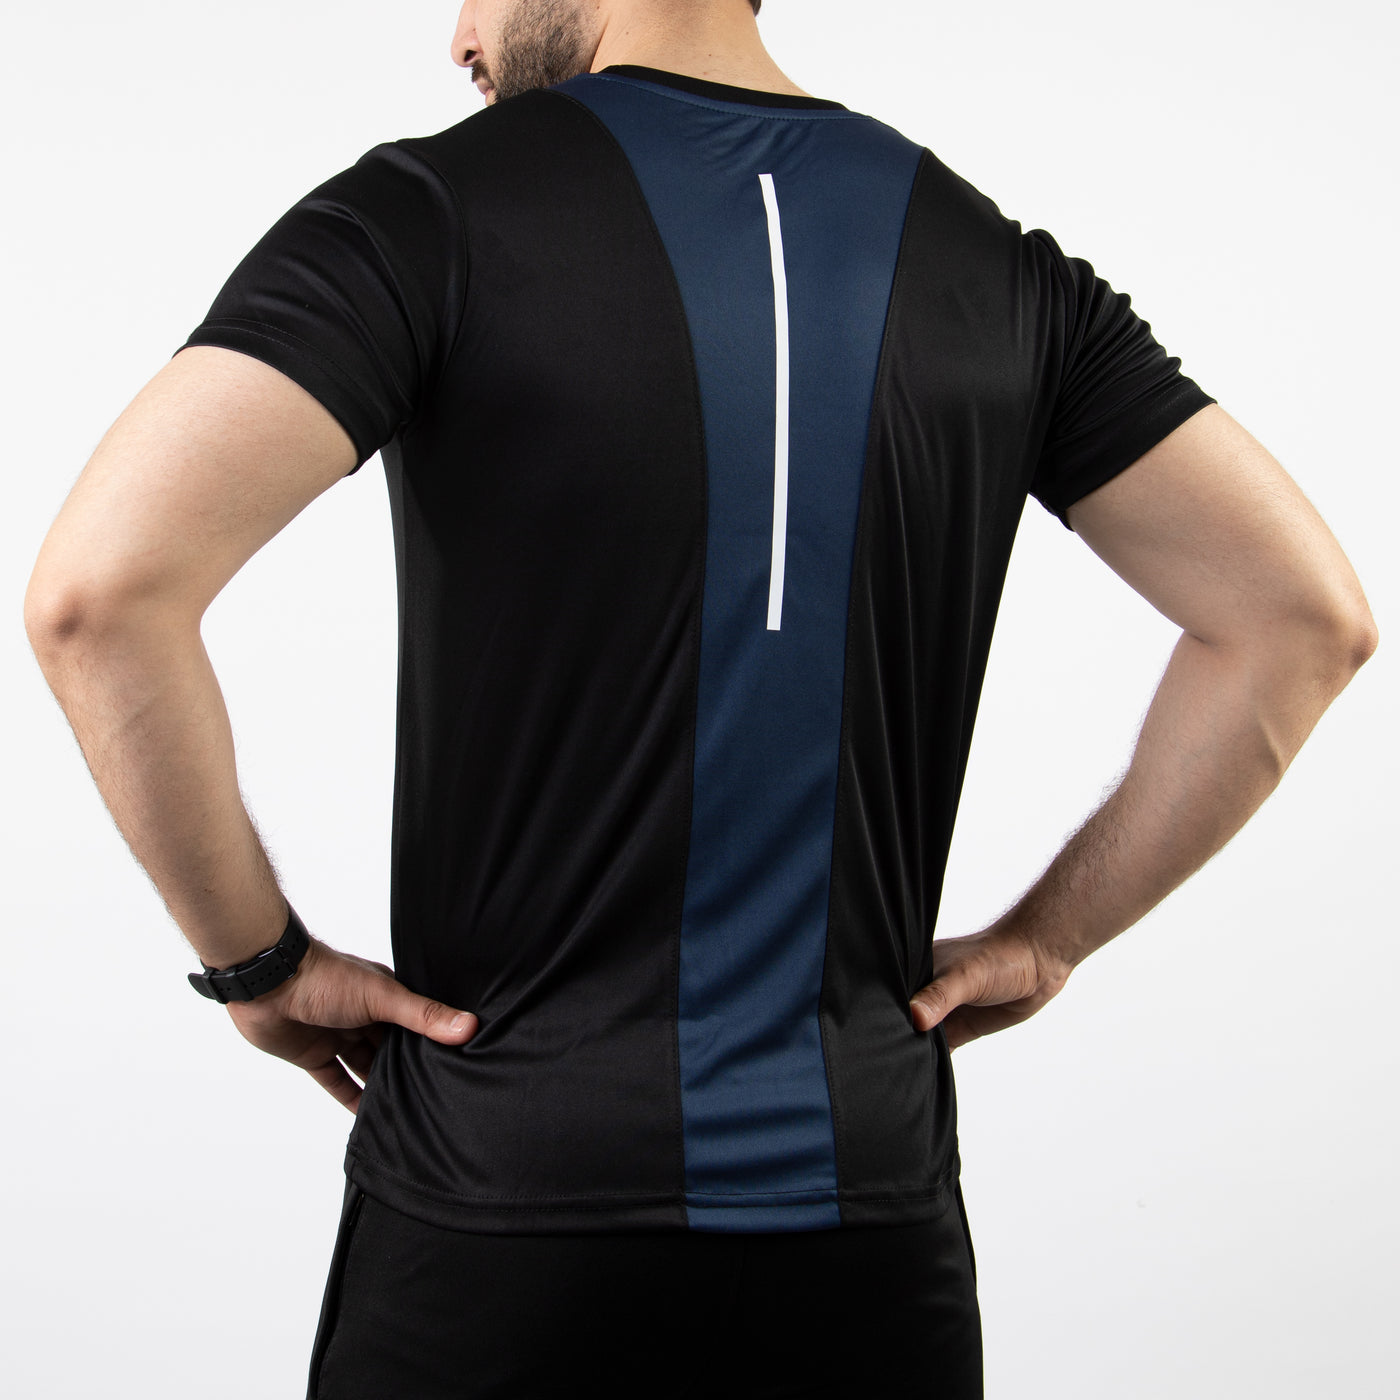 Black Core Series Quick Dry T-Shirt with Navy Back Panel